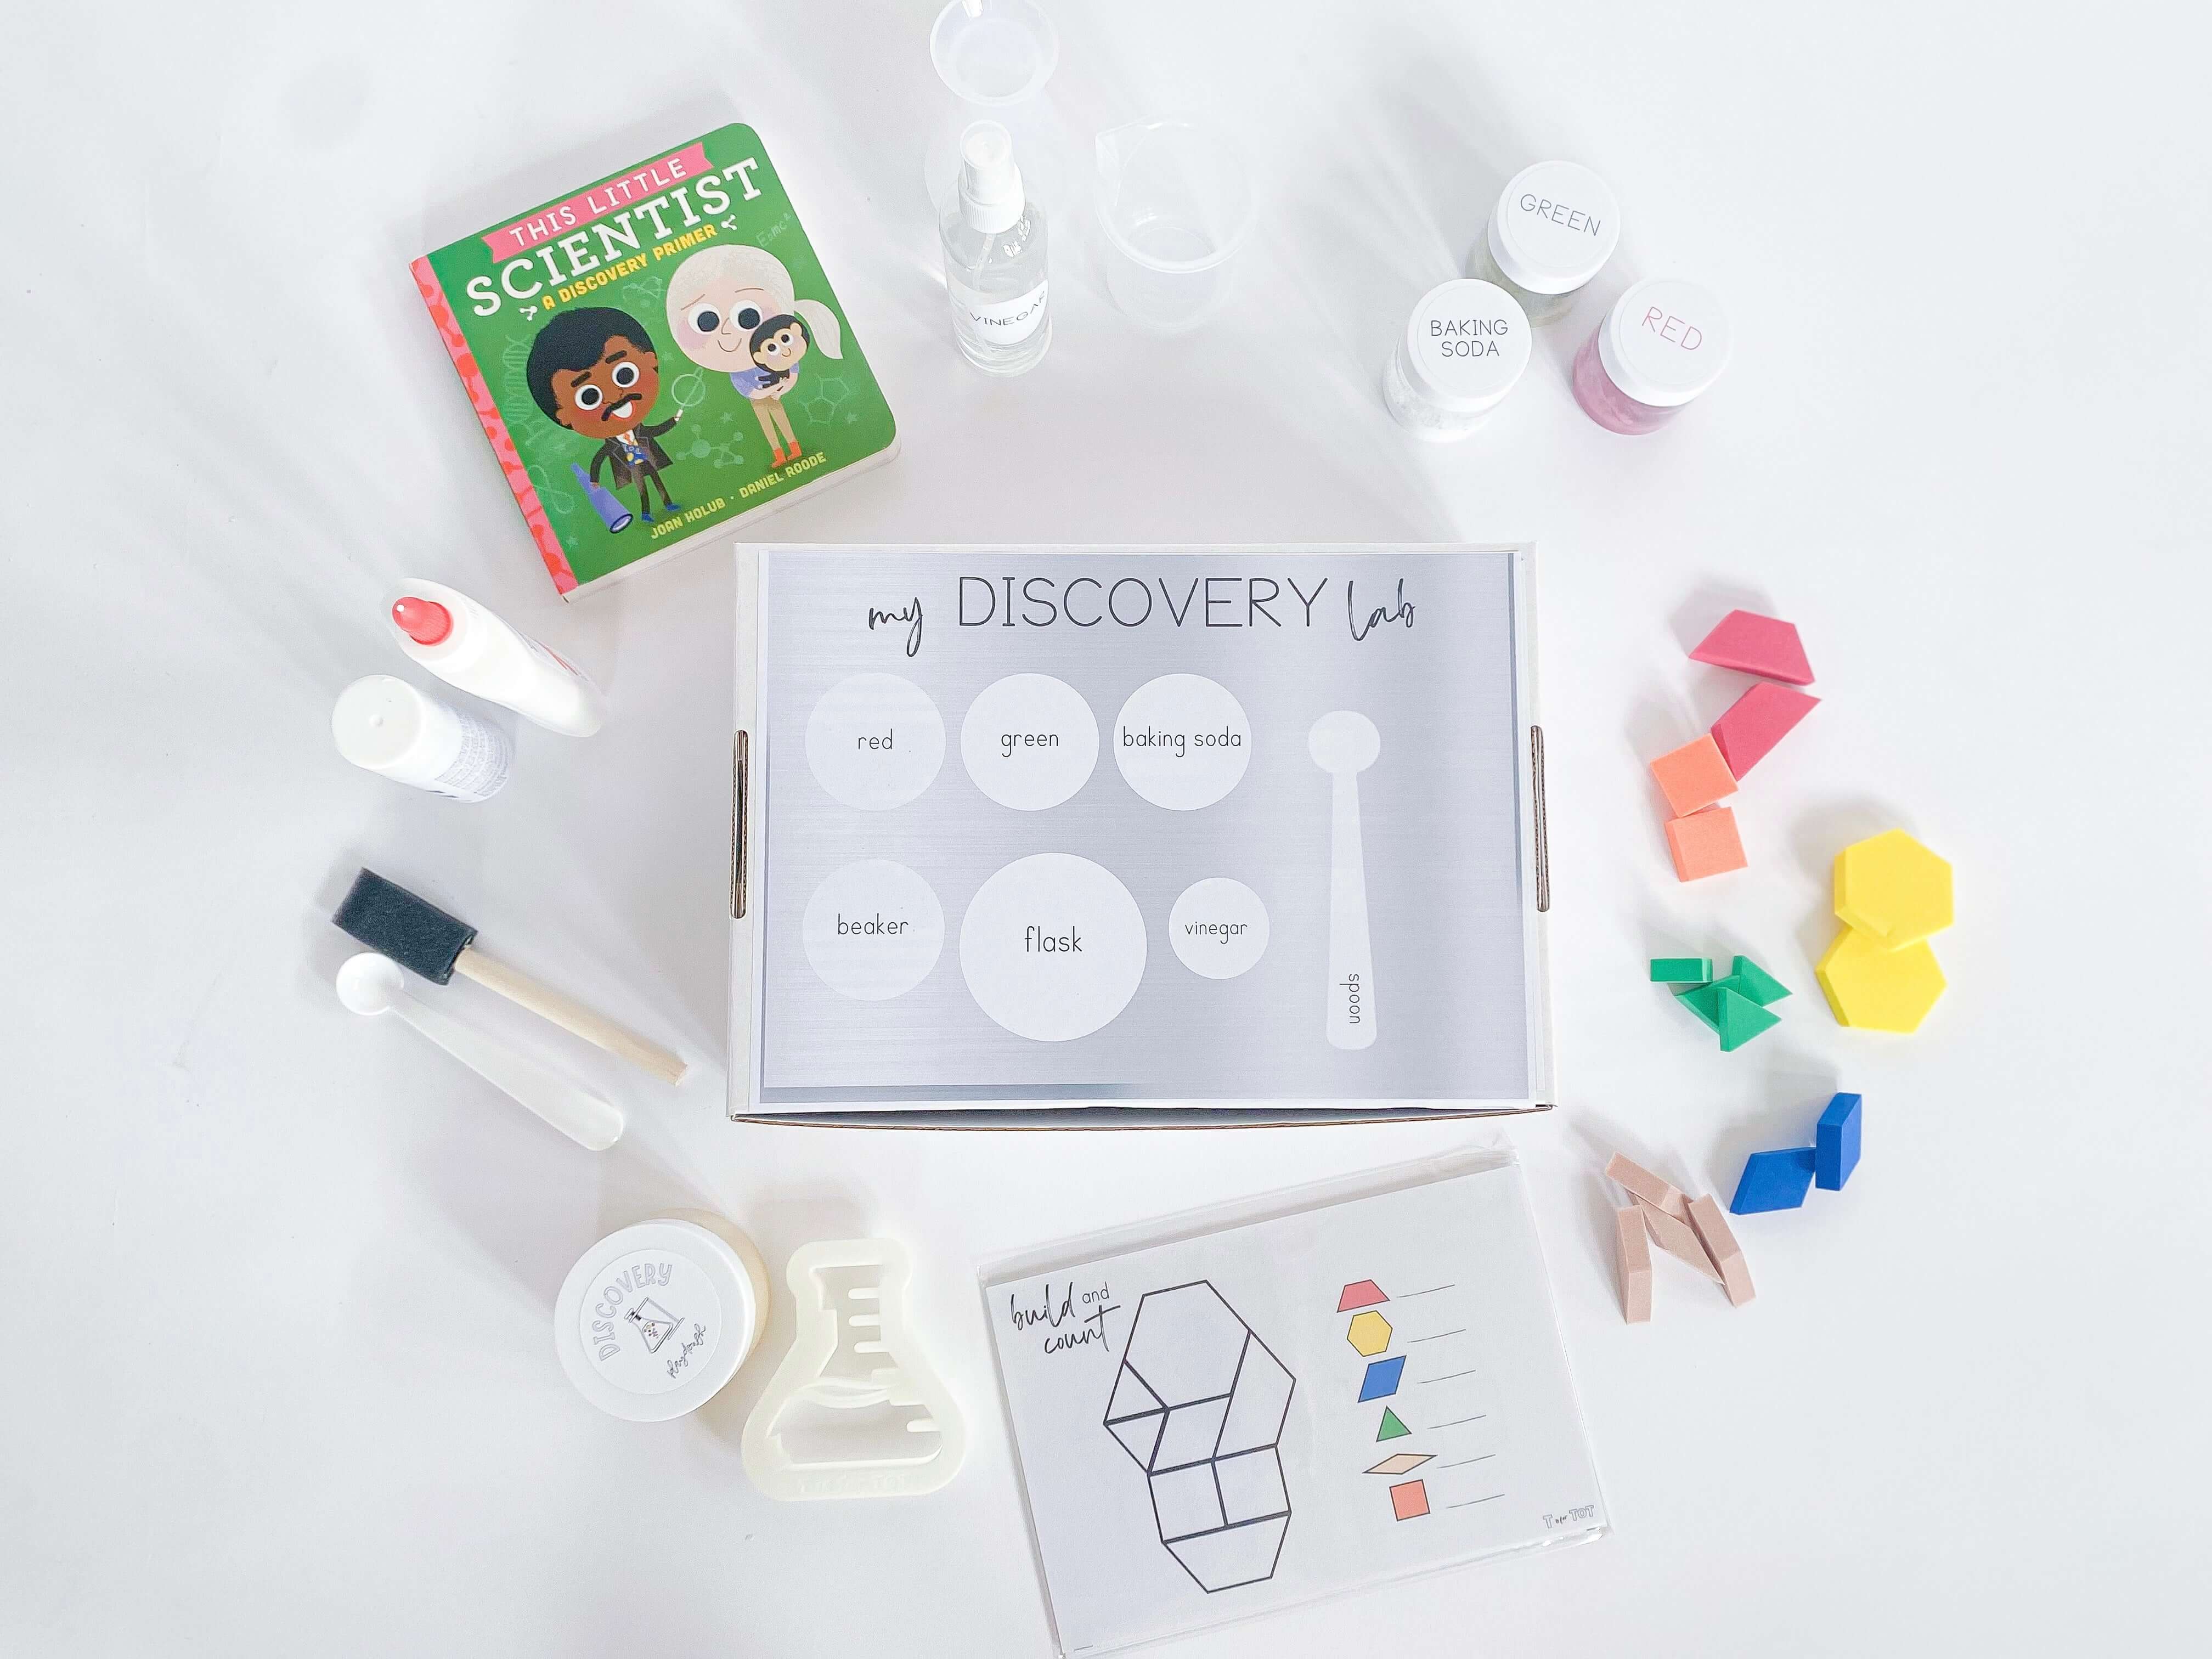 Play-based Discovery Kit for kids, including homemade playdough, custom flask playdough cutter, and science experiment materials. Includes a Little Scientist board book, art experiment supplies, and a detailed brochure with instructions.